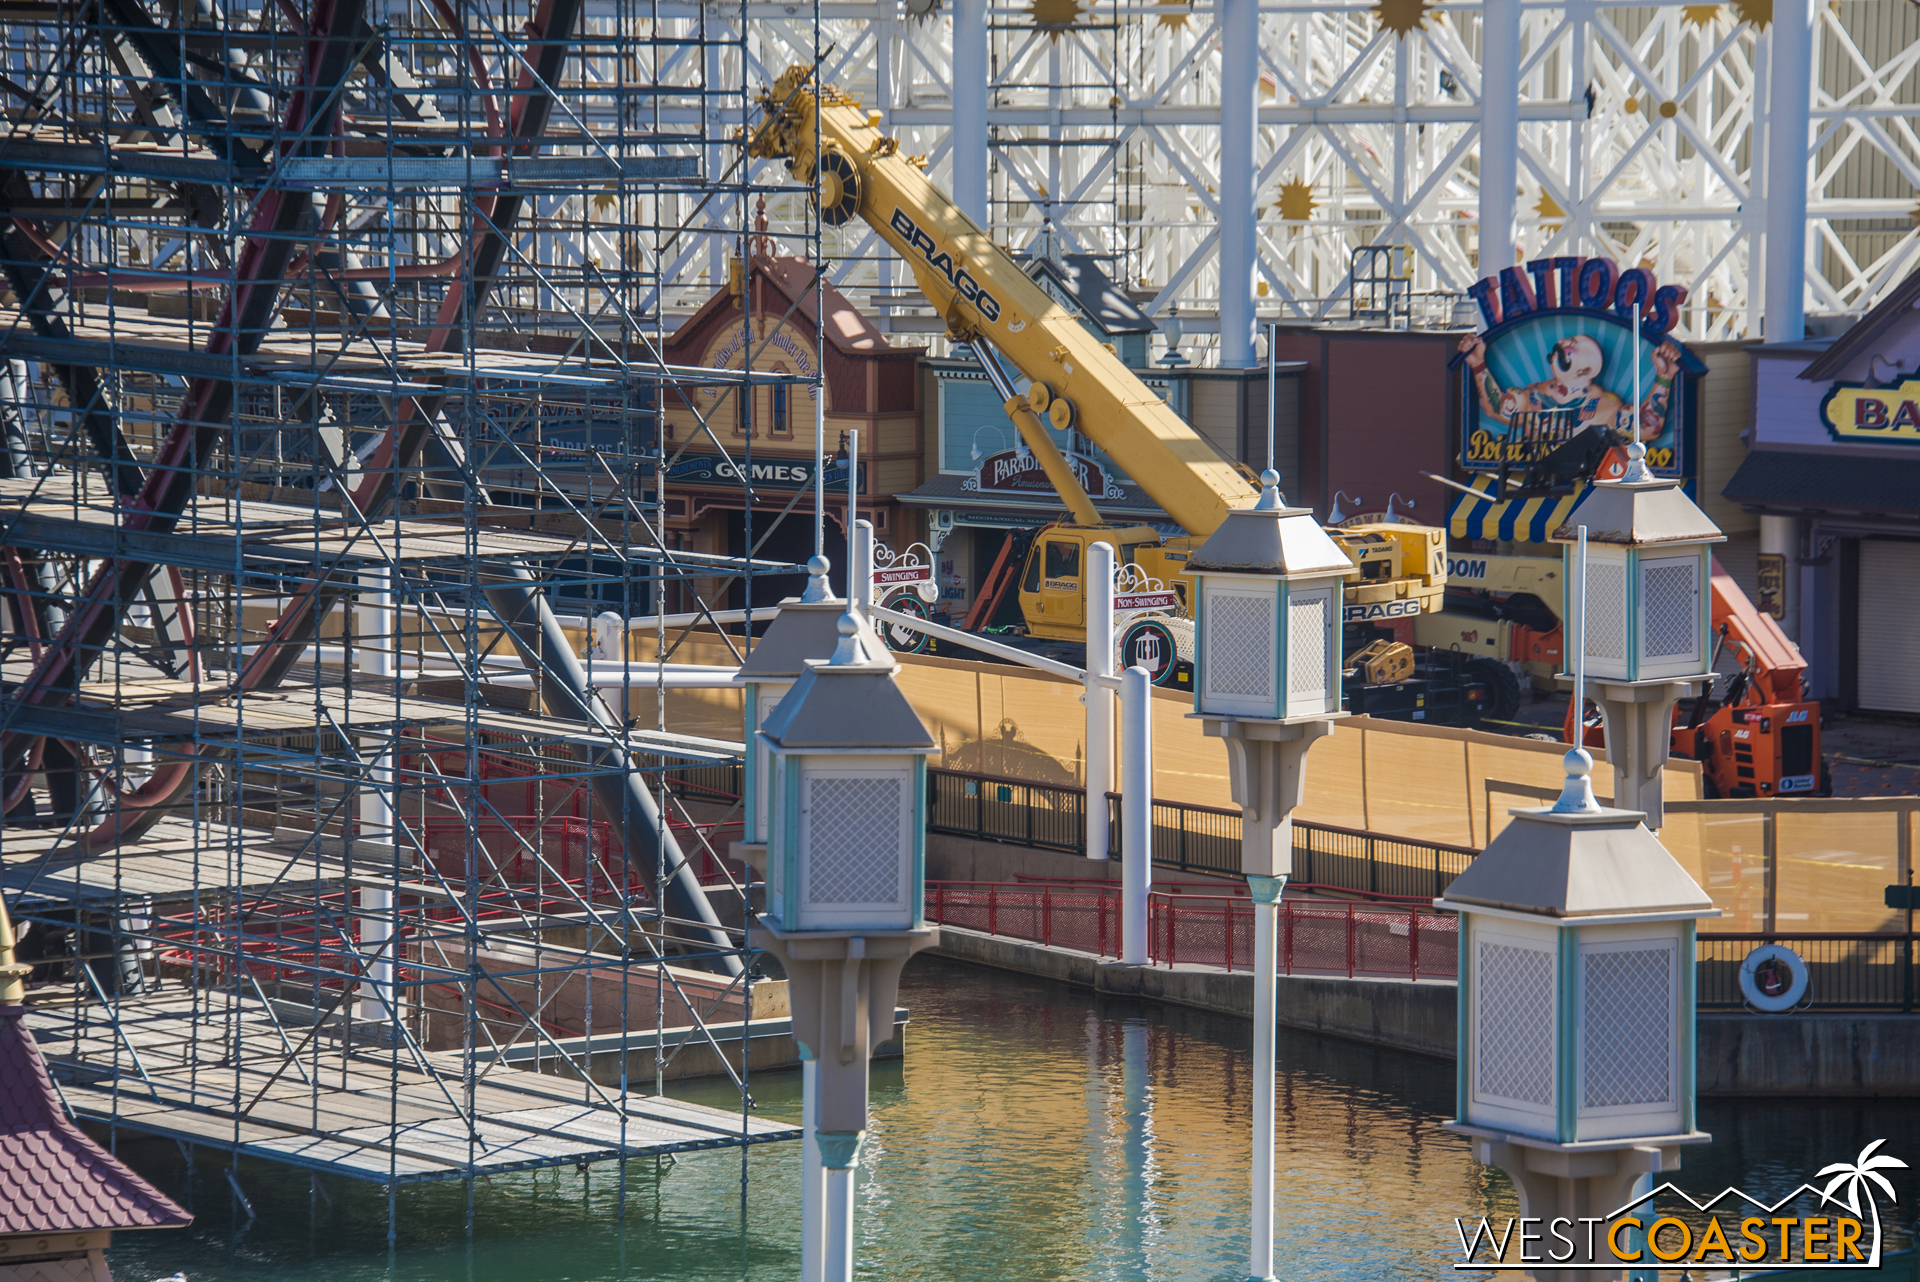  A crane has shown up over by the midway games. 